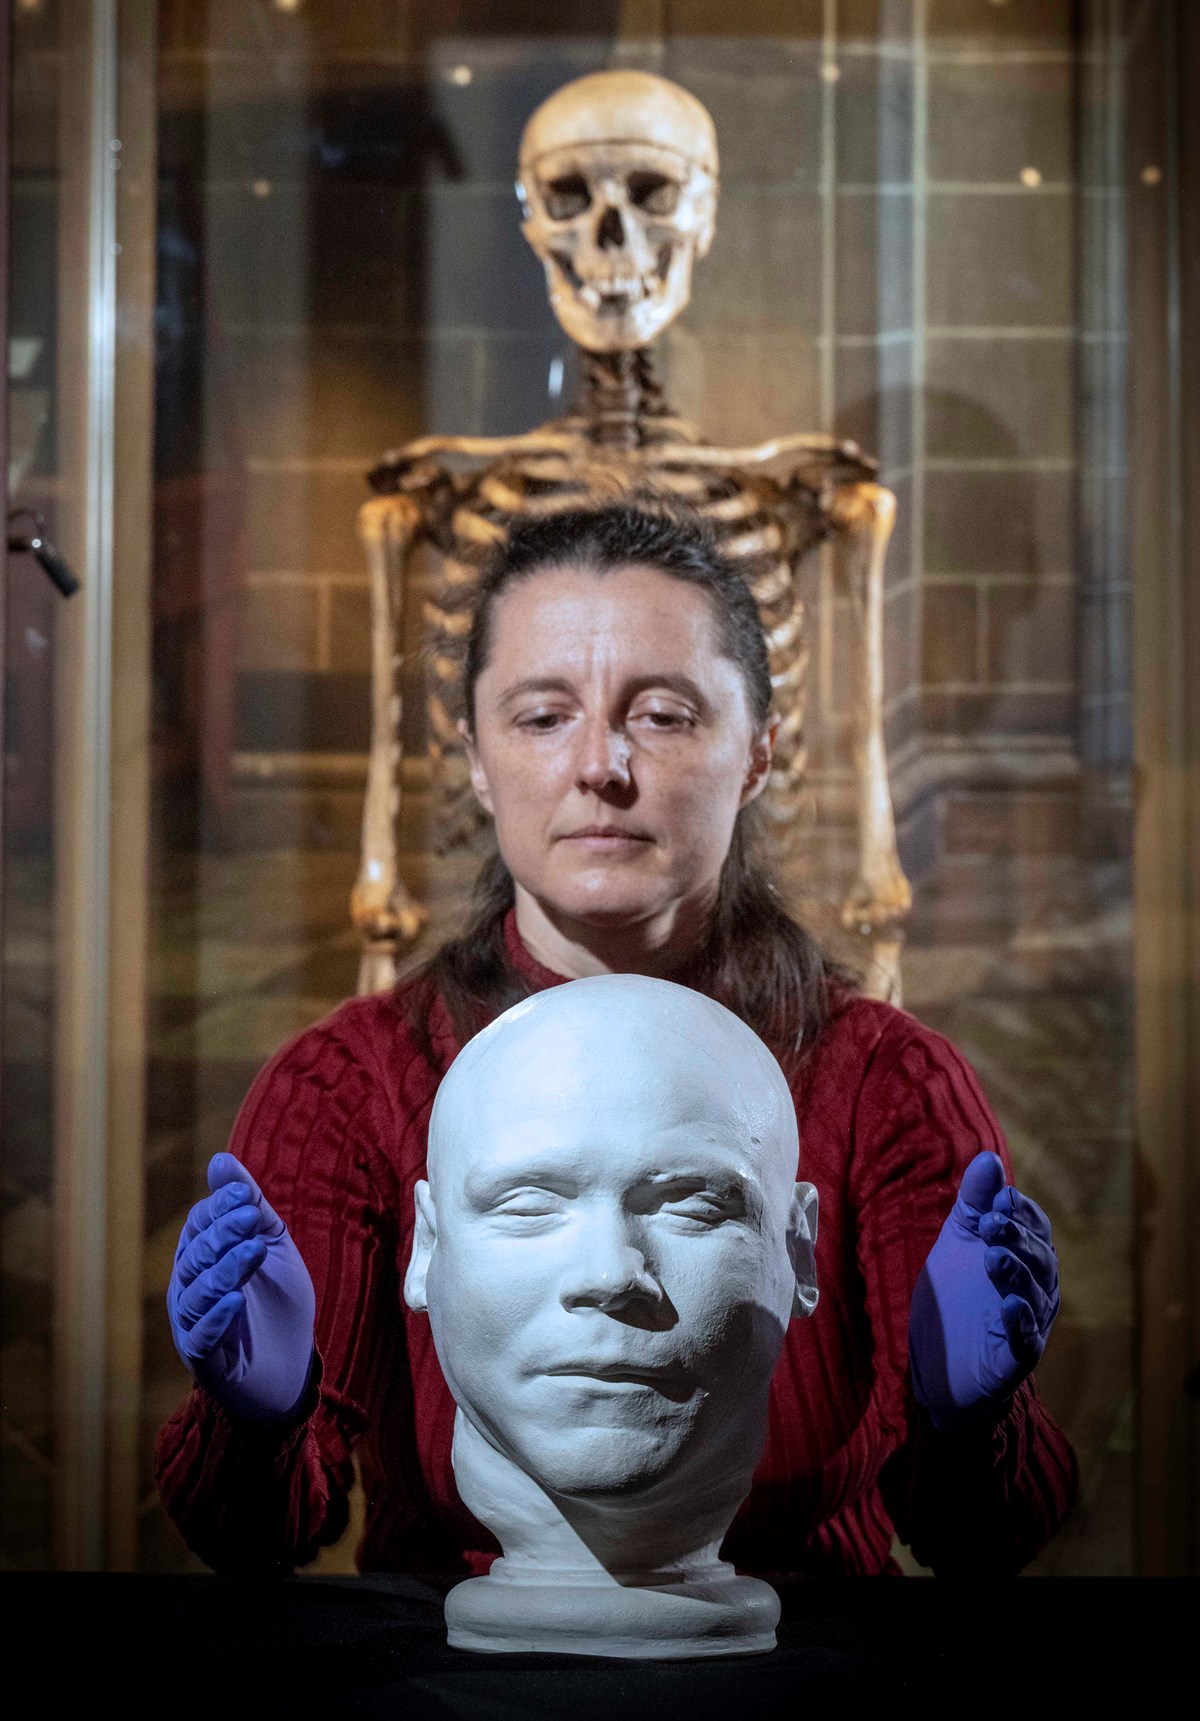 Curator Dr Tacye Phillipson with the skeleton and death mask of William Burke  on loan from the Anatomical Museum collection, University of Edinburg. Photo © Neil Hanna (2)